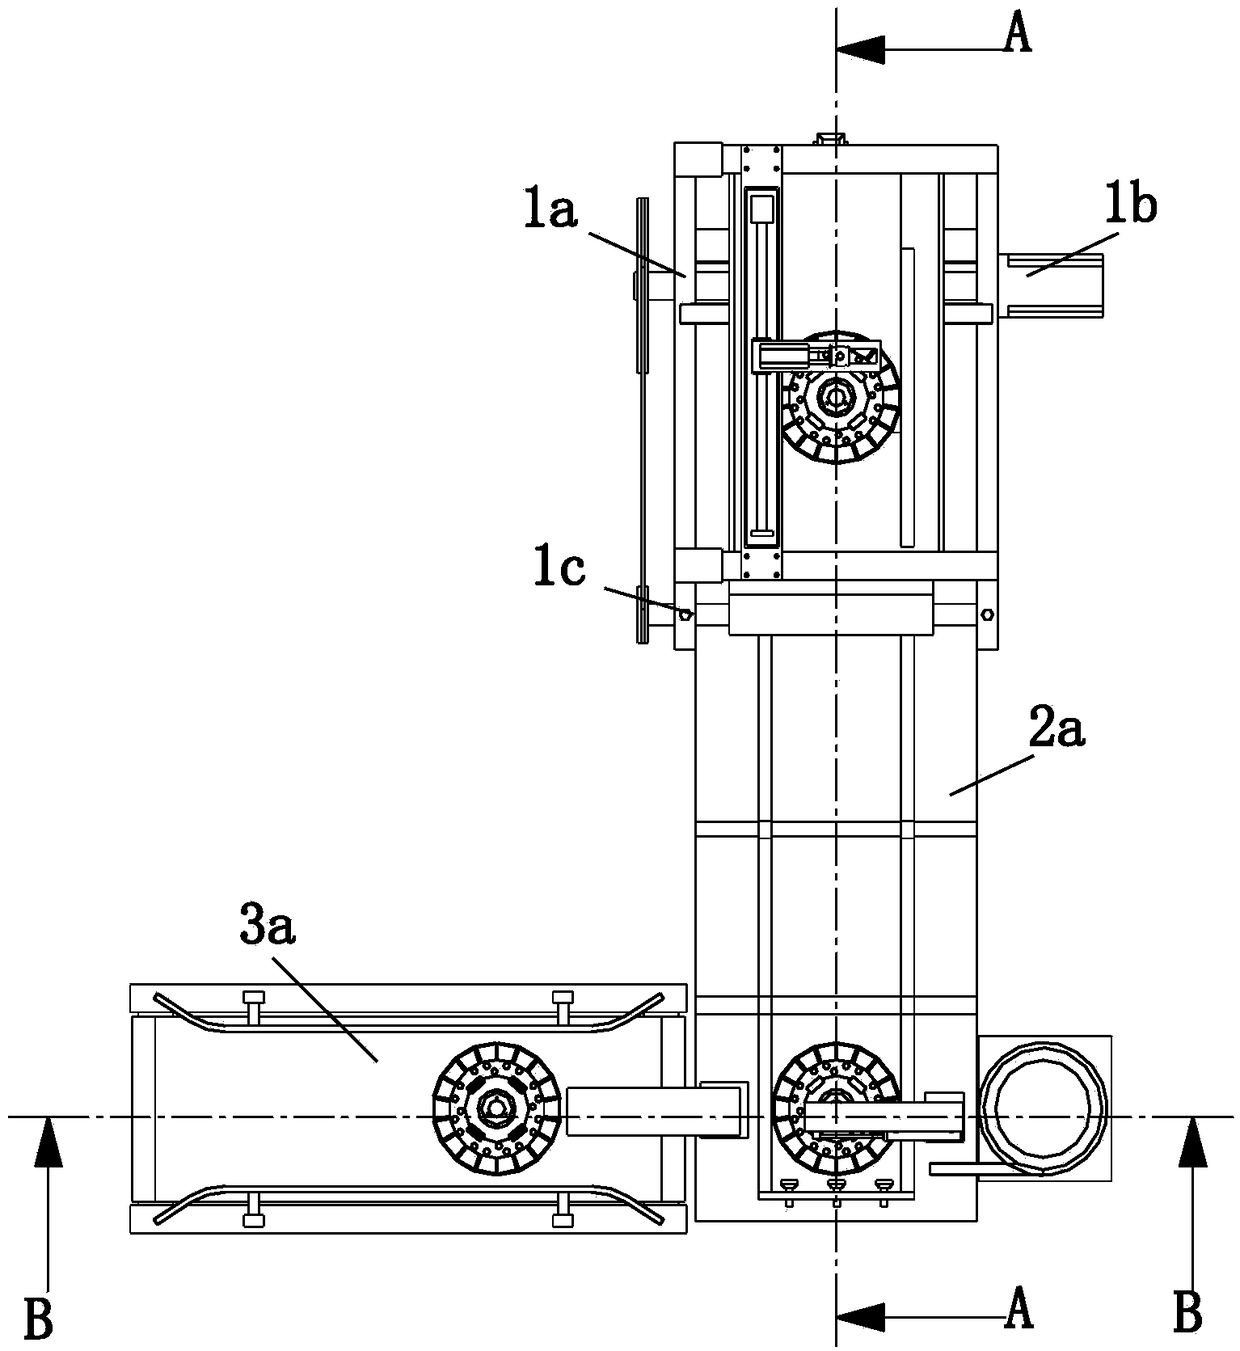 Working method of shock absorption assembling equipment for automobile platens